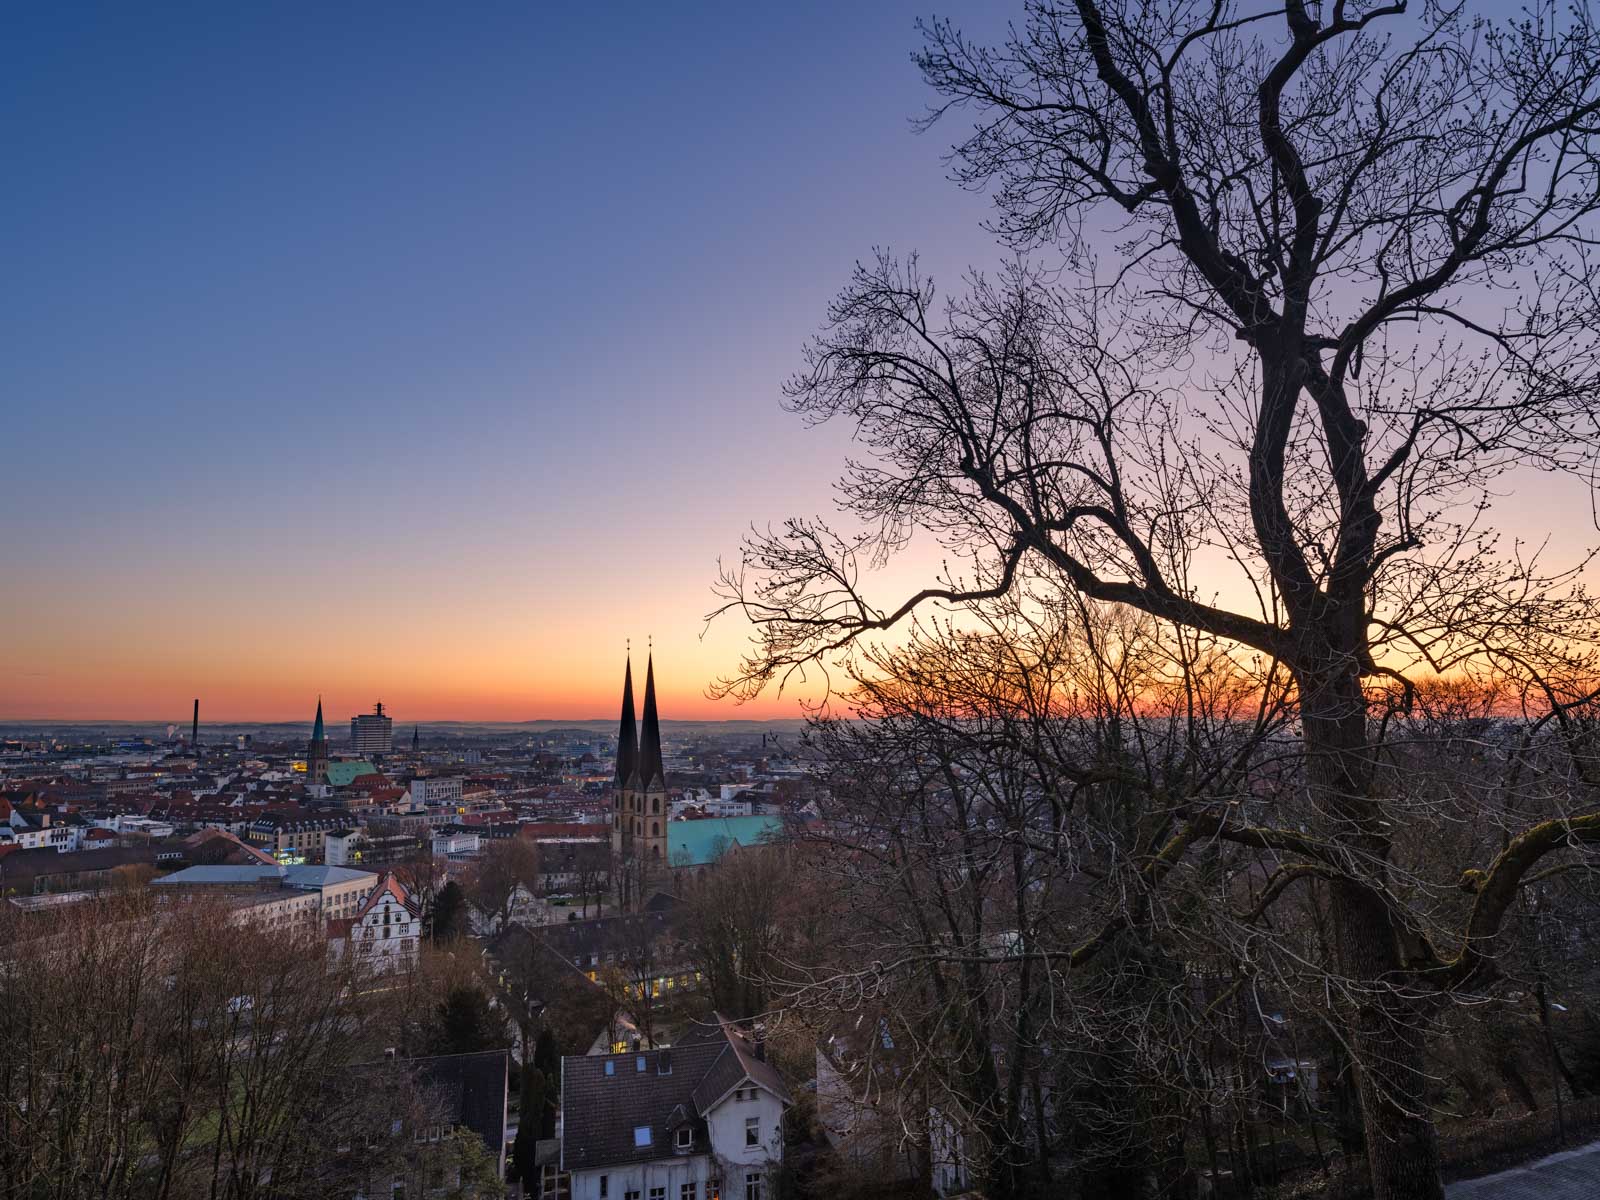 View over Bielefeld in the early morning from Sparrenburg Castle (Germany).